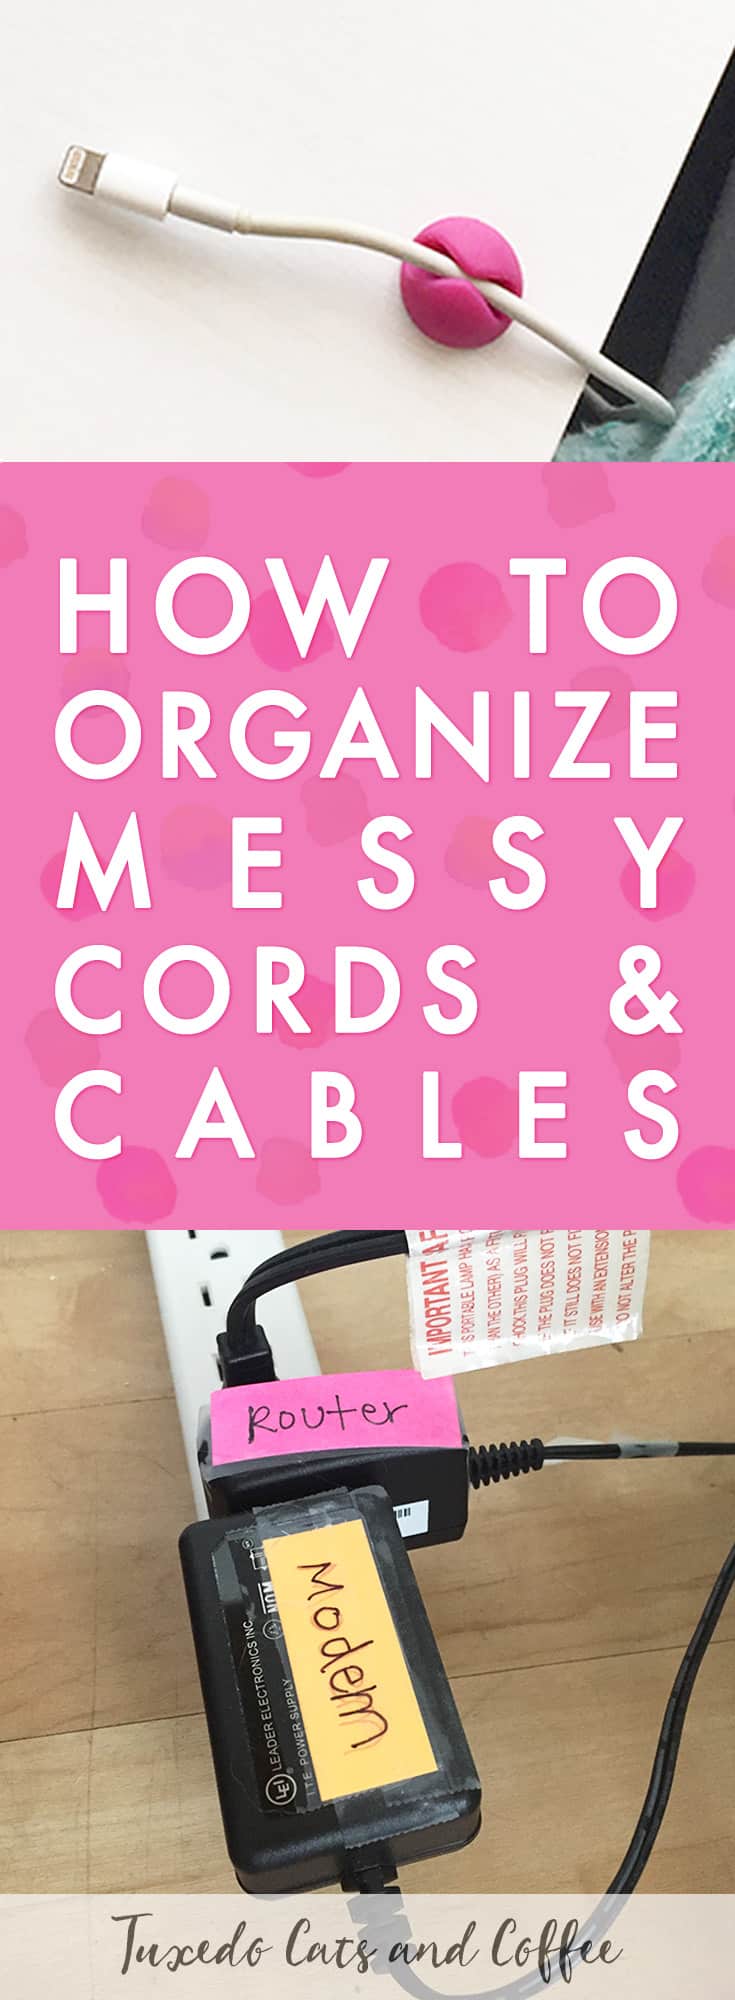 Got a mess of tangled cords, phone chargers, and random electronic cables everywhere? Can't find the cord or charger you actually need when you need it? Here's how to organize messy cords and cables with just a few simple tips.